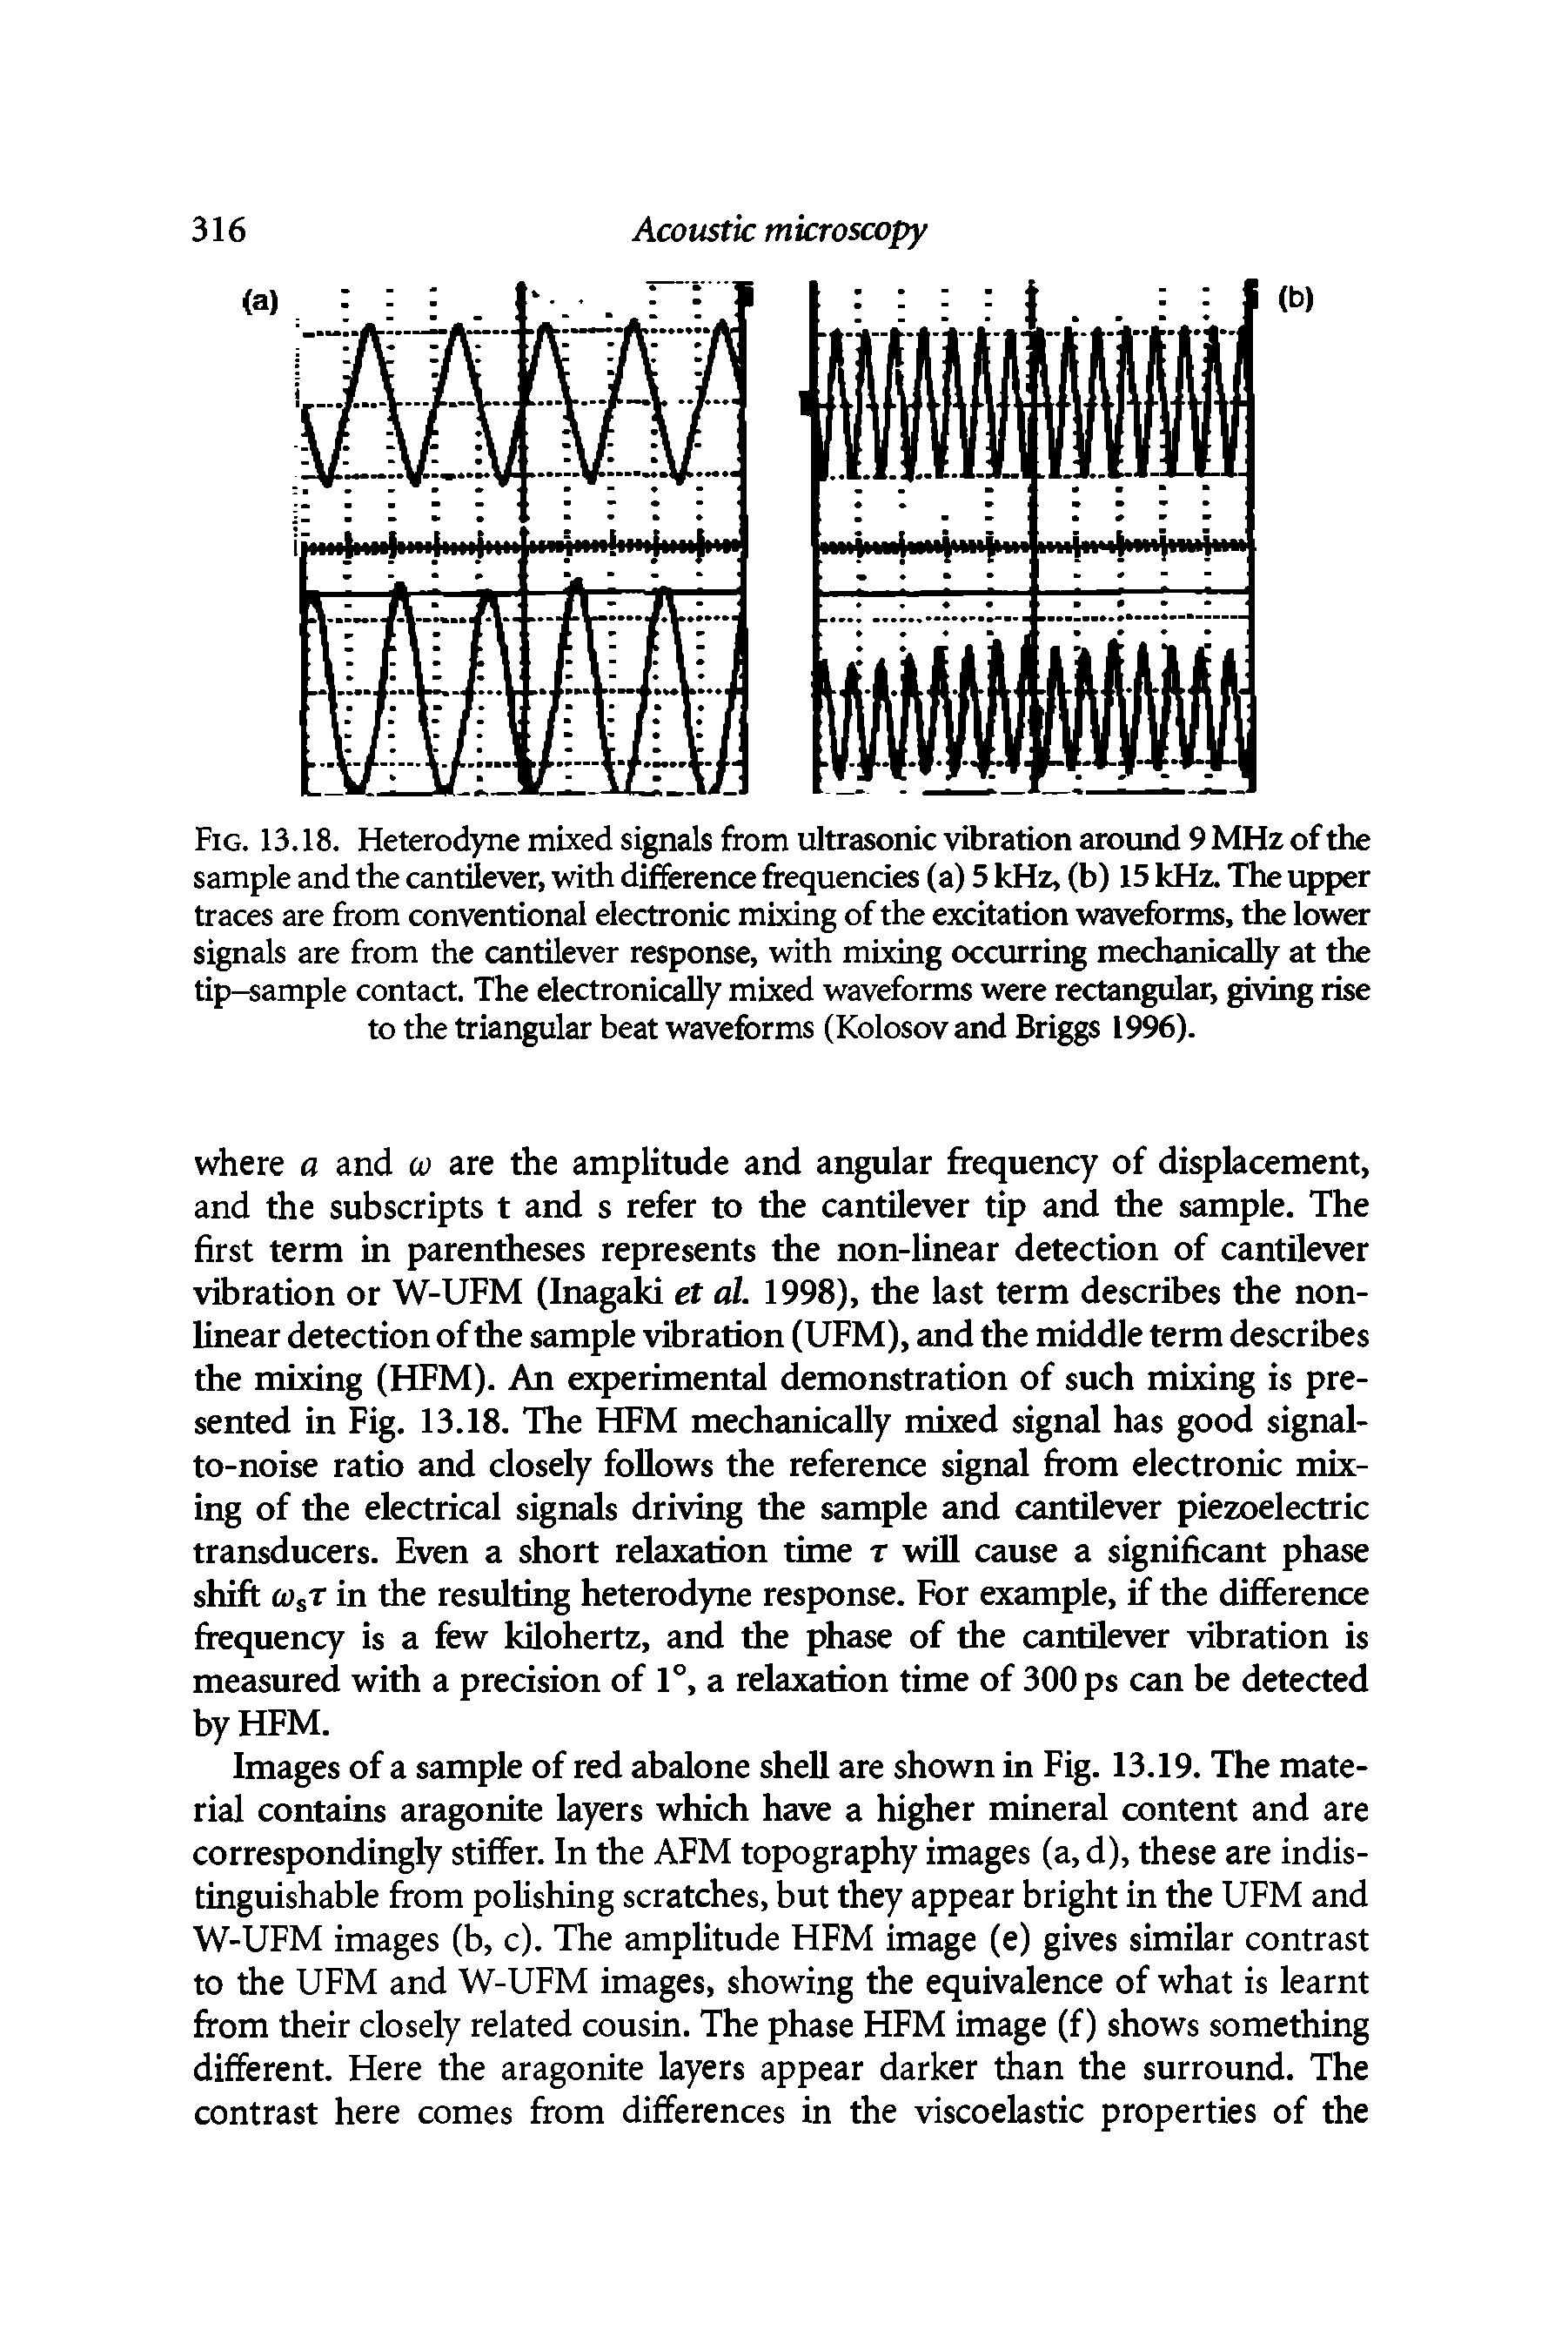 Fig. 13.18. Heterodyne mixed signals from ultrasonic vibration around 9 MHz of the sample and the cantilever, with difference frequencies (a) 5 kHz, (b) 15 kHz. The upper traces are from conventional electronic mixing of the excitation waveforms, the lower signals are from the cantilever response, with mixing occurring mechanically at the tip-sample contact. The electronically mixed waveforms were rectangular, giving rise to the triangular beat waveforms (Kolosov and Briggs 1996).